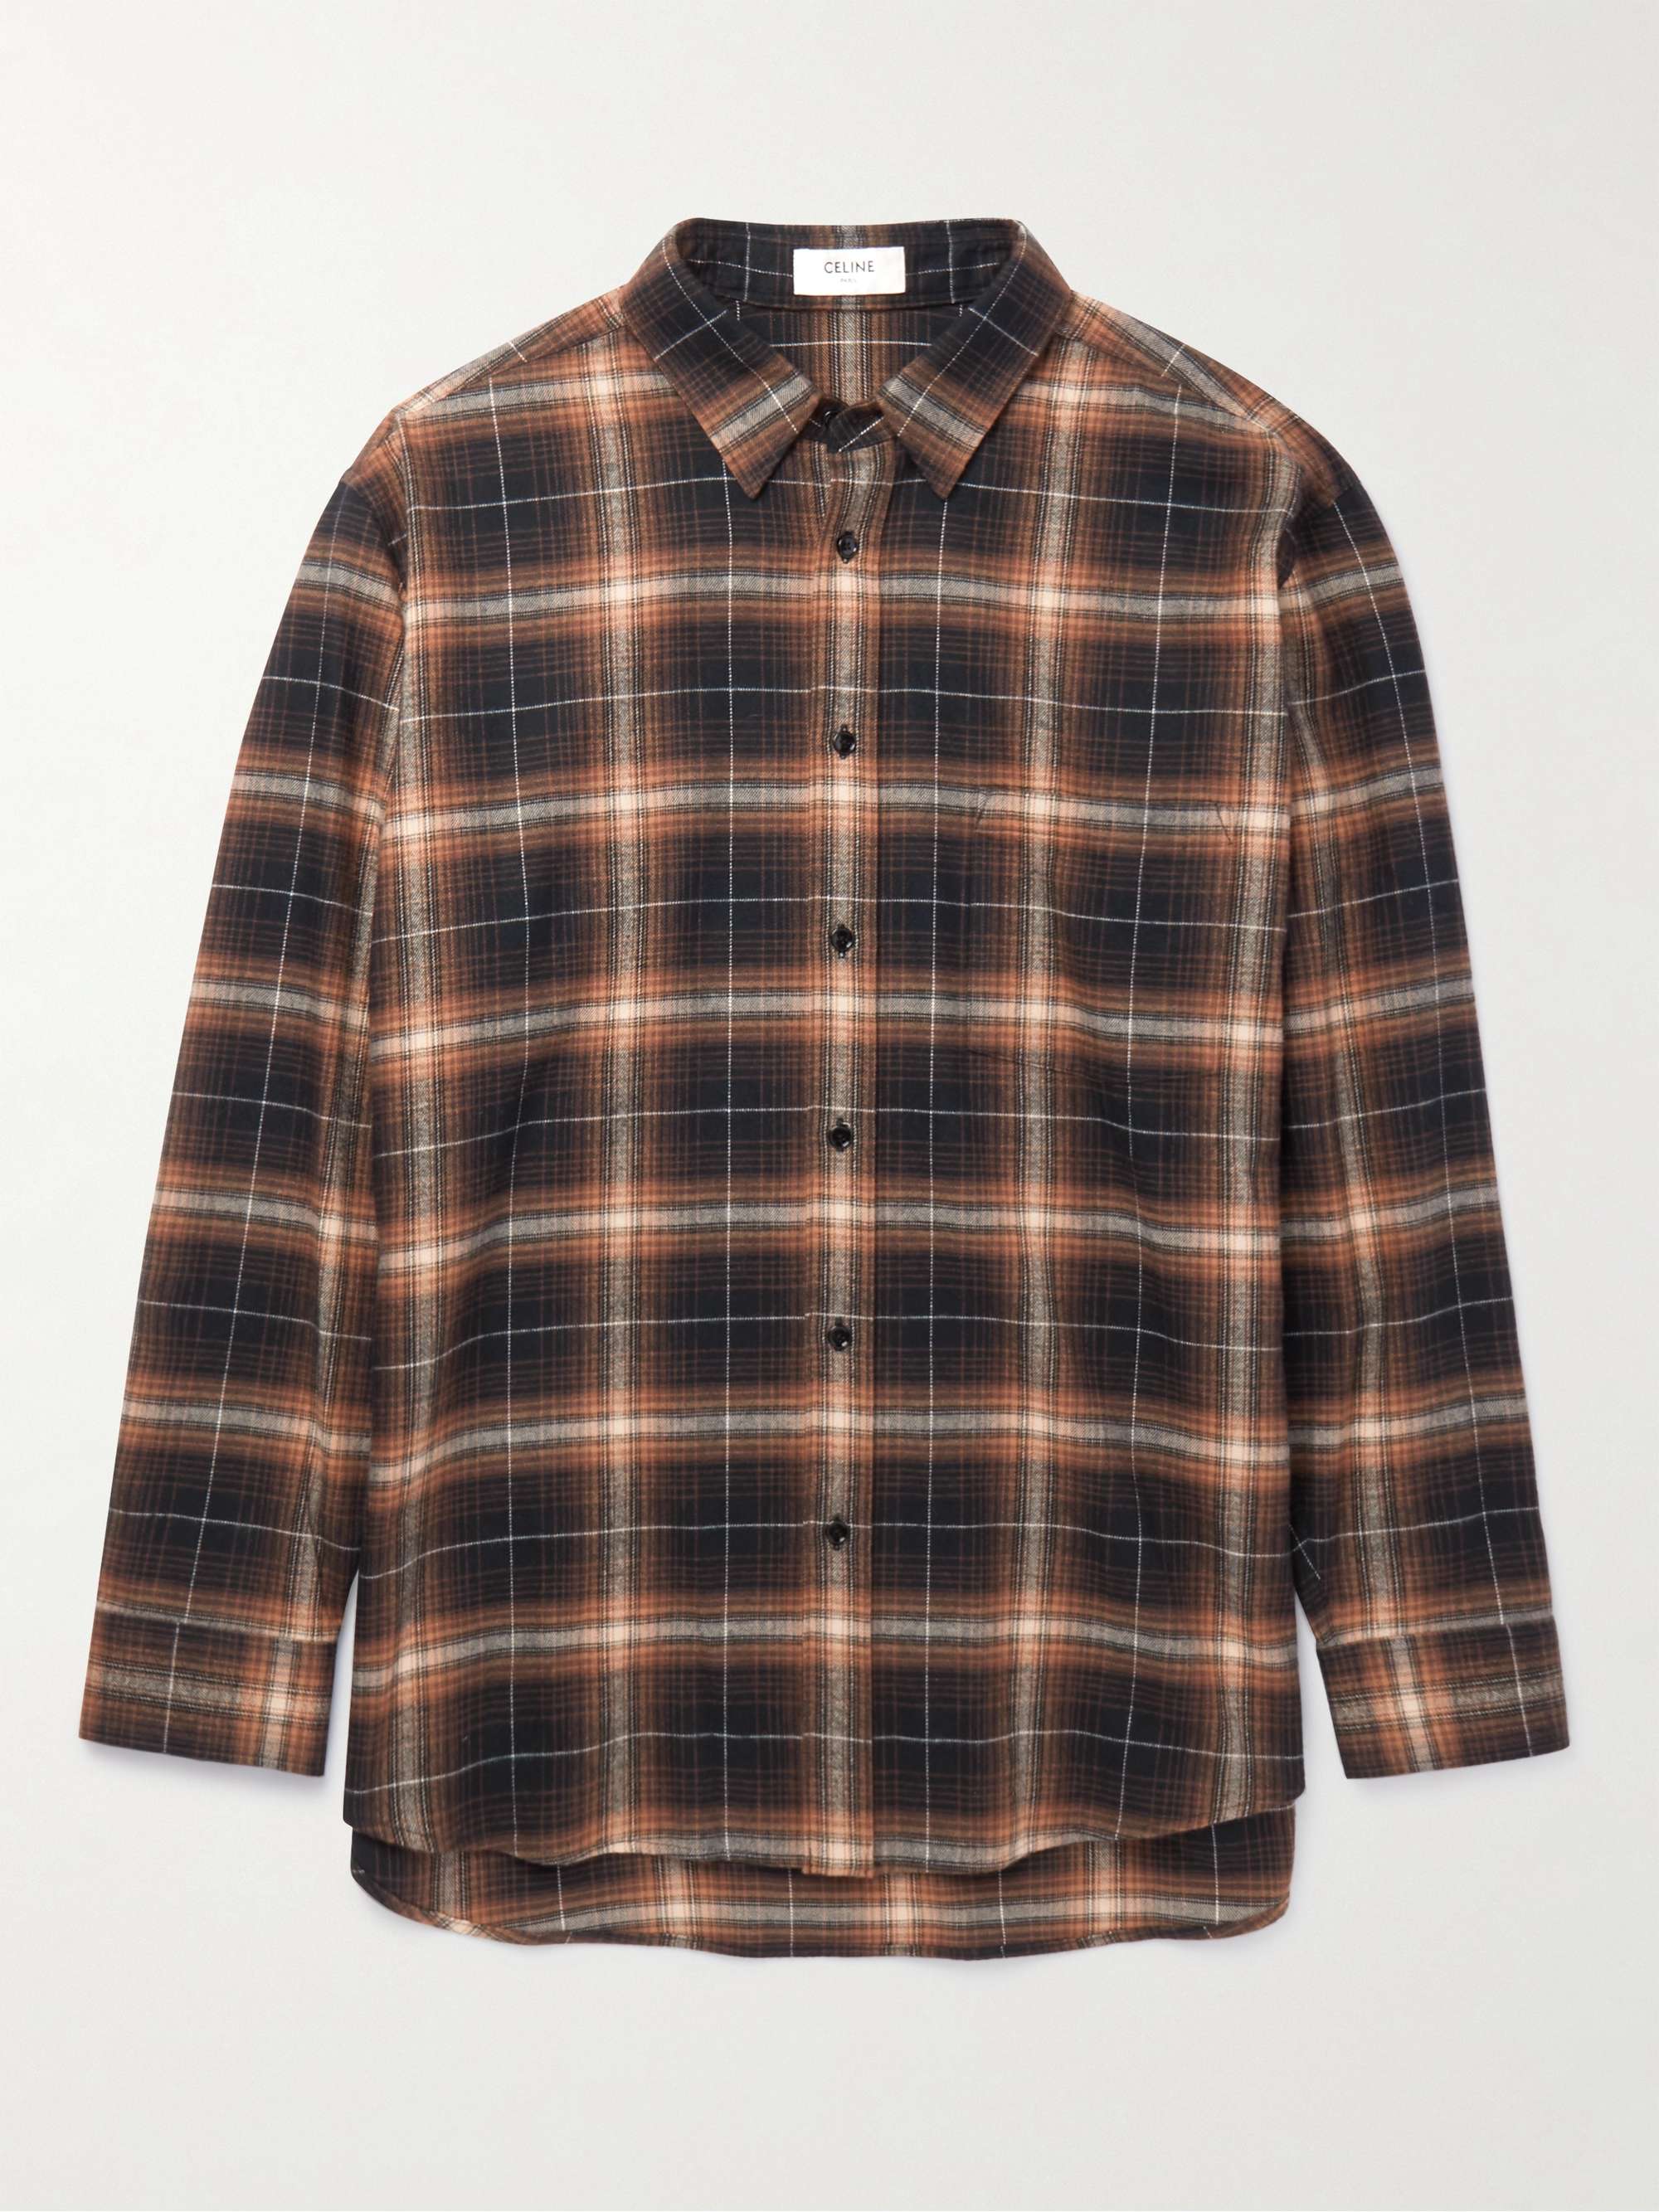 CELINE HOMME Checked Cotton-Flannel Shirt